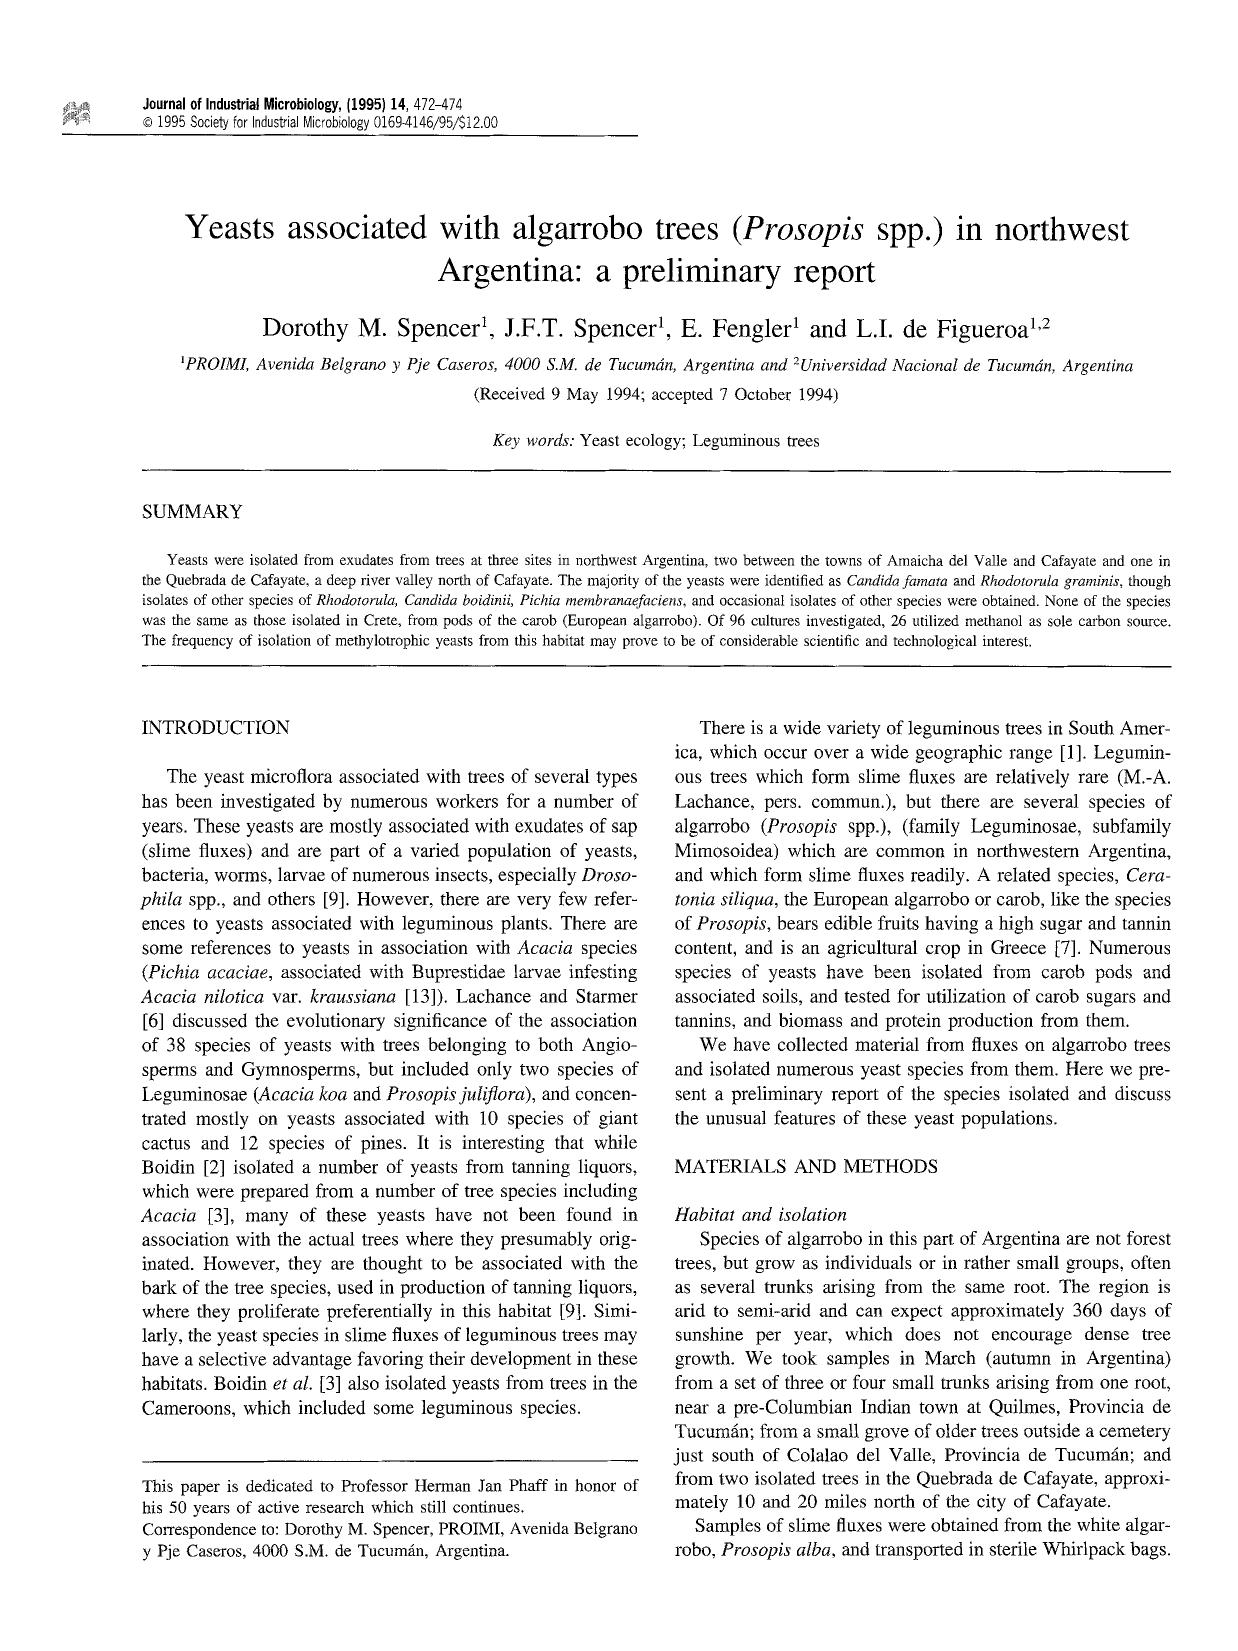 Yeasts associated with algarrobo trees ( <Emphasis Type="Italic">Prosopis <Emphasis> spp.) in northwest Argentina: A preliminary report by Unknown